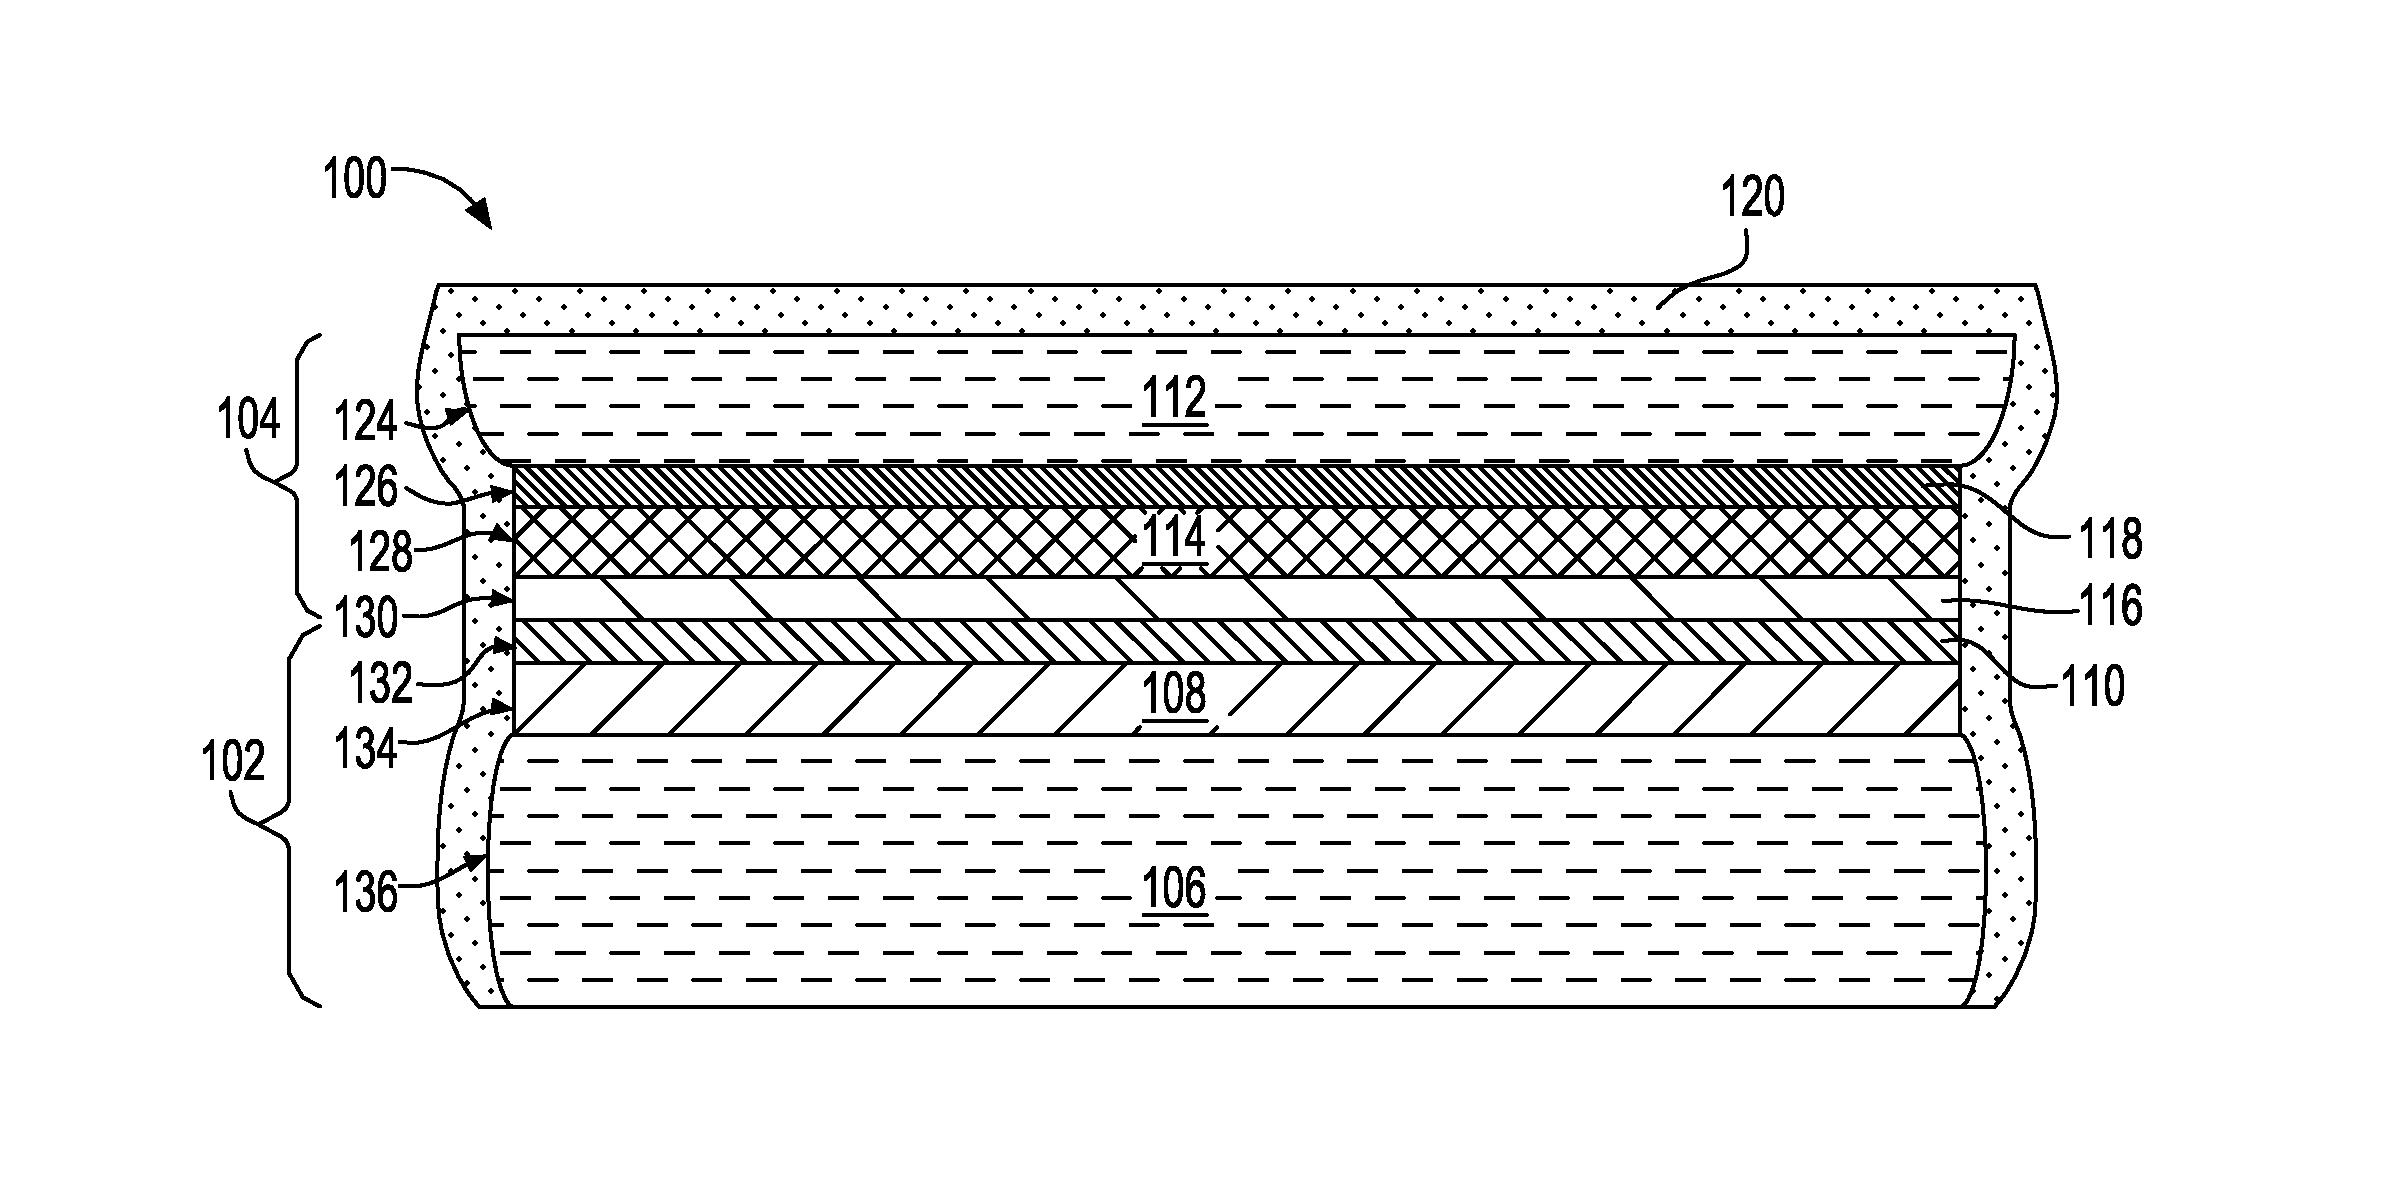 Edge Protection of Bonded Wafers During Wafer Thinning